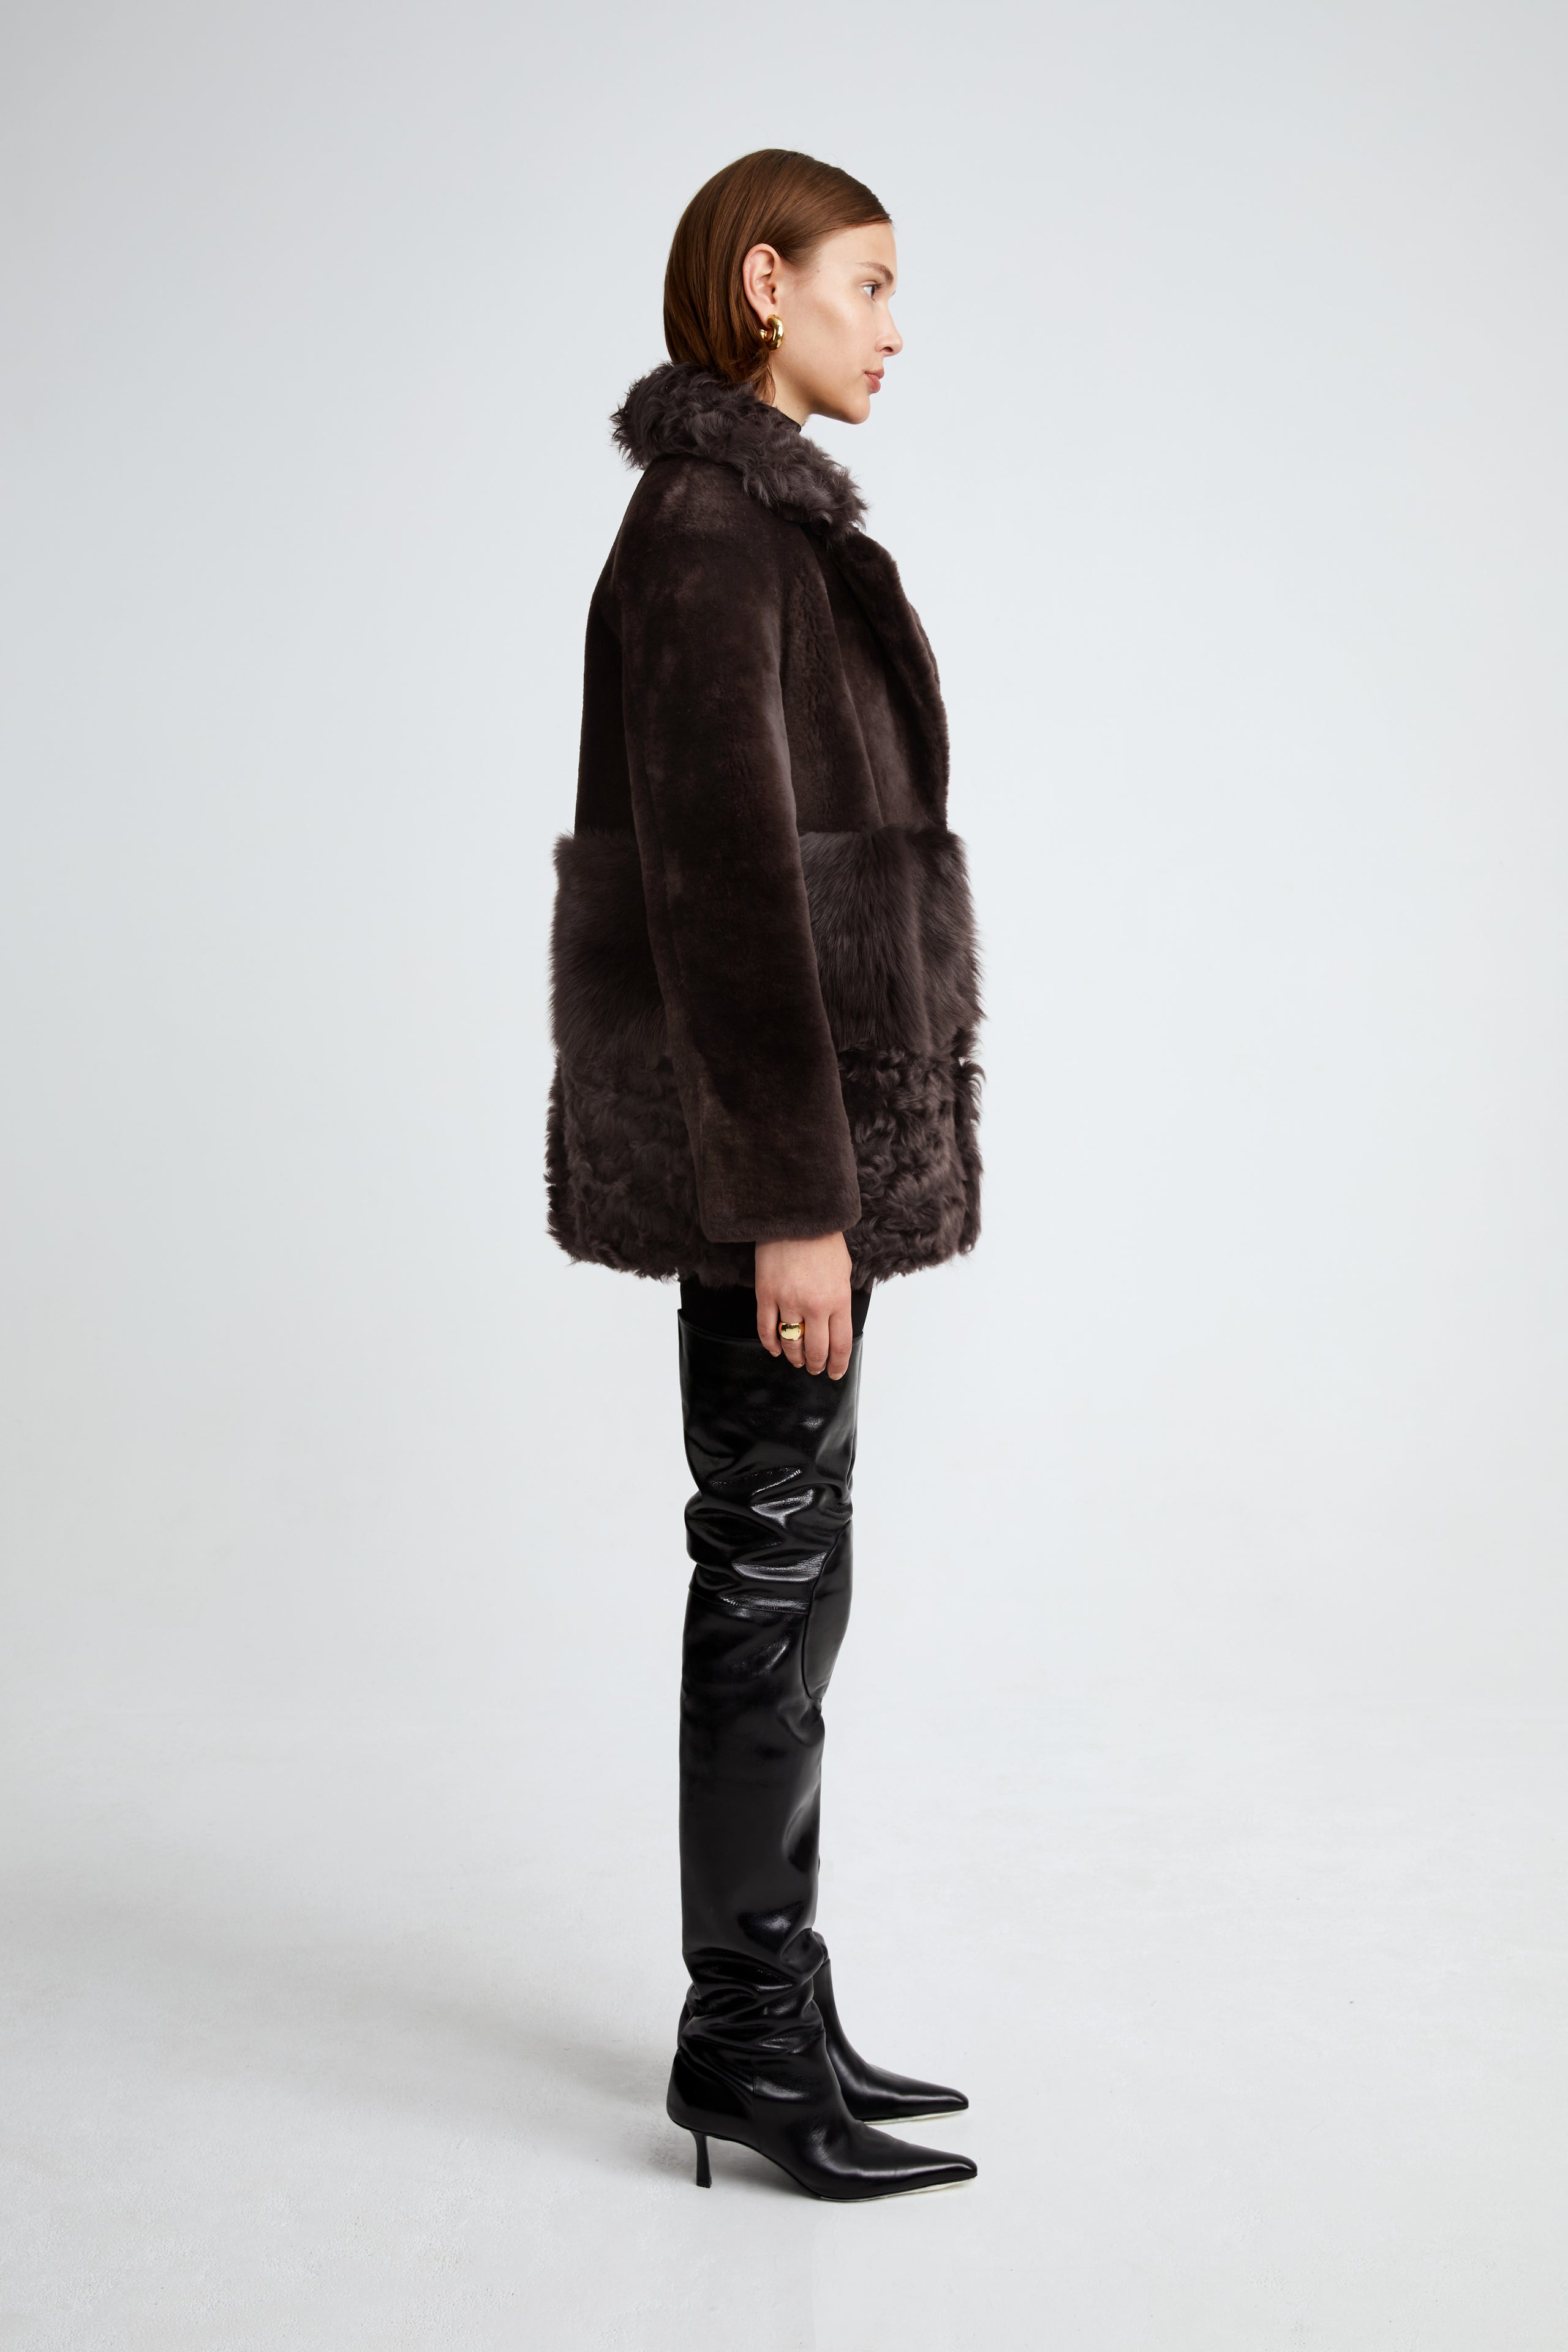 Model is wearing the Anouk Dark Chocolate Luxurious Shearling Coat Side